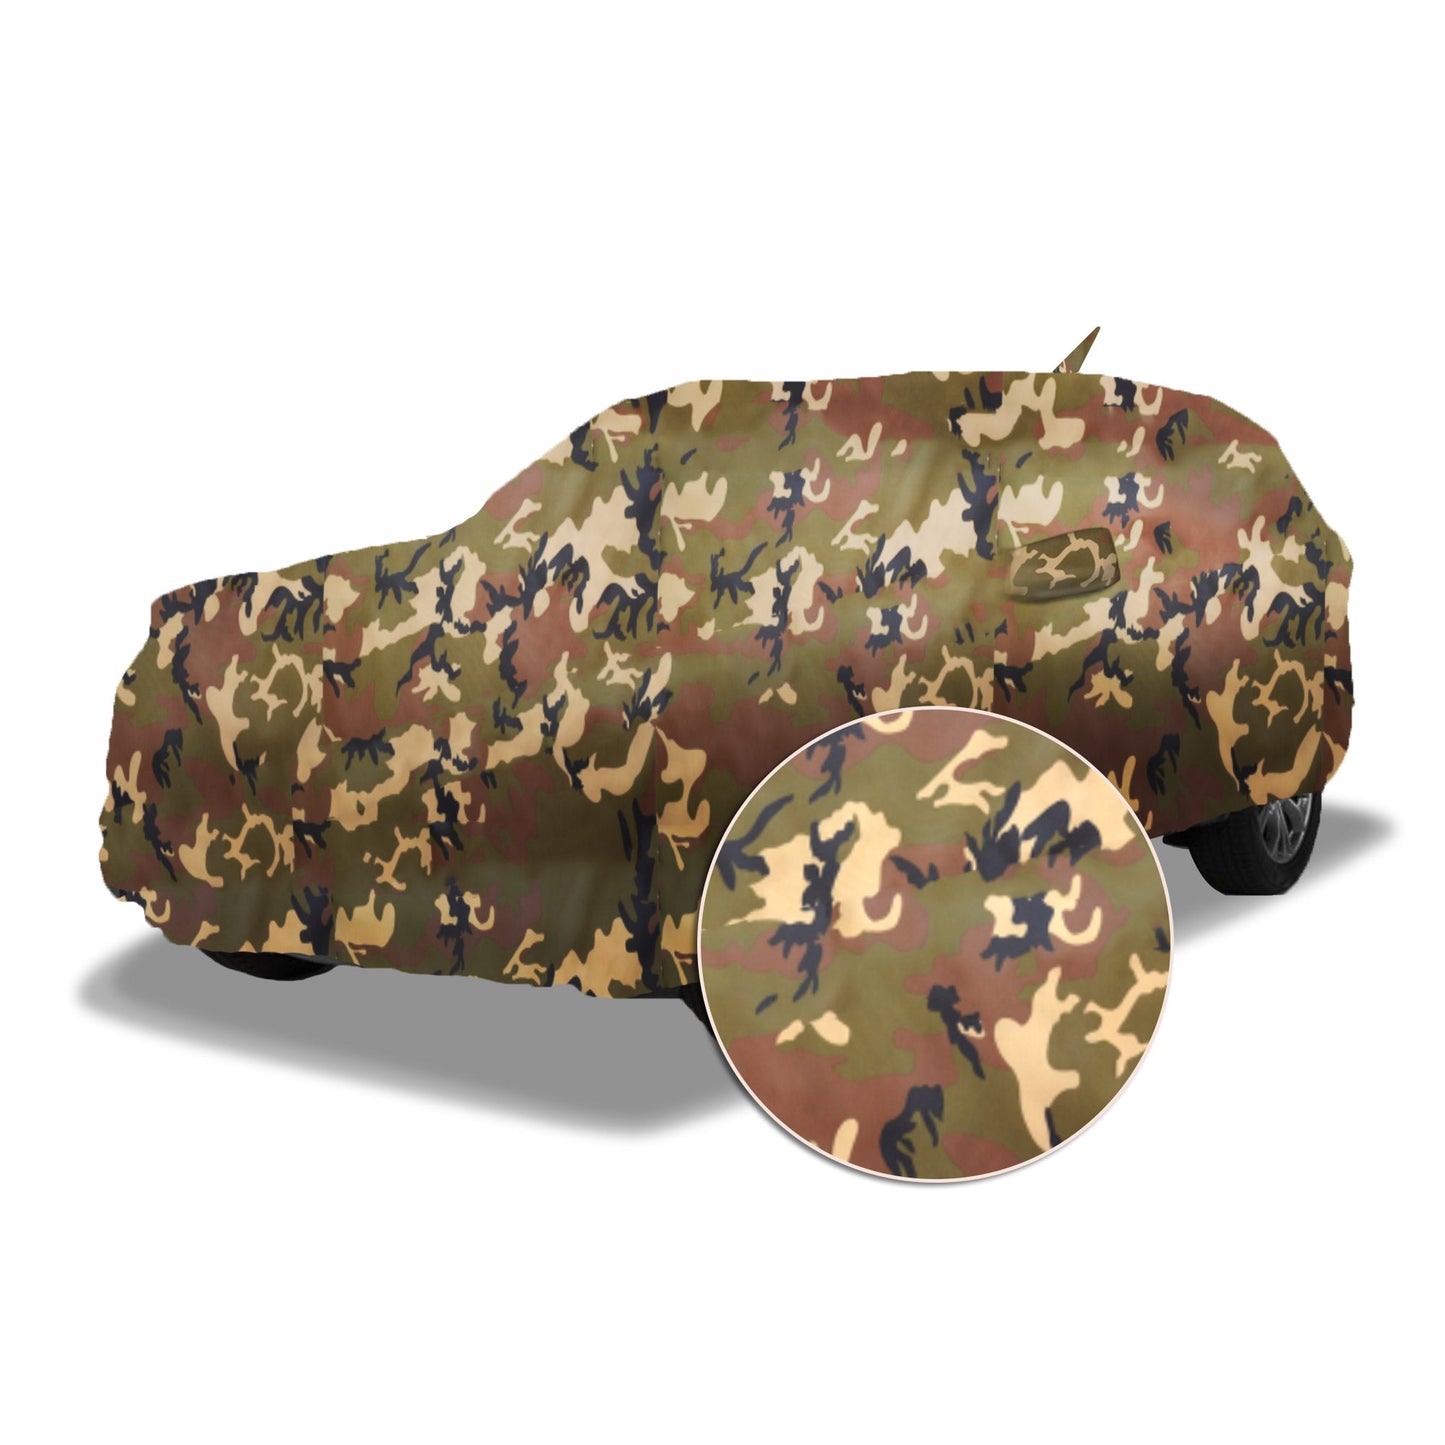 Ascot Mahindra XUV 500 Car Body Cover Extra Strong & Dust Proof Jungle Military Car Cover with UV Proof & Water-Resistant Coating